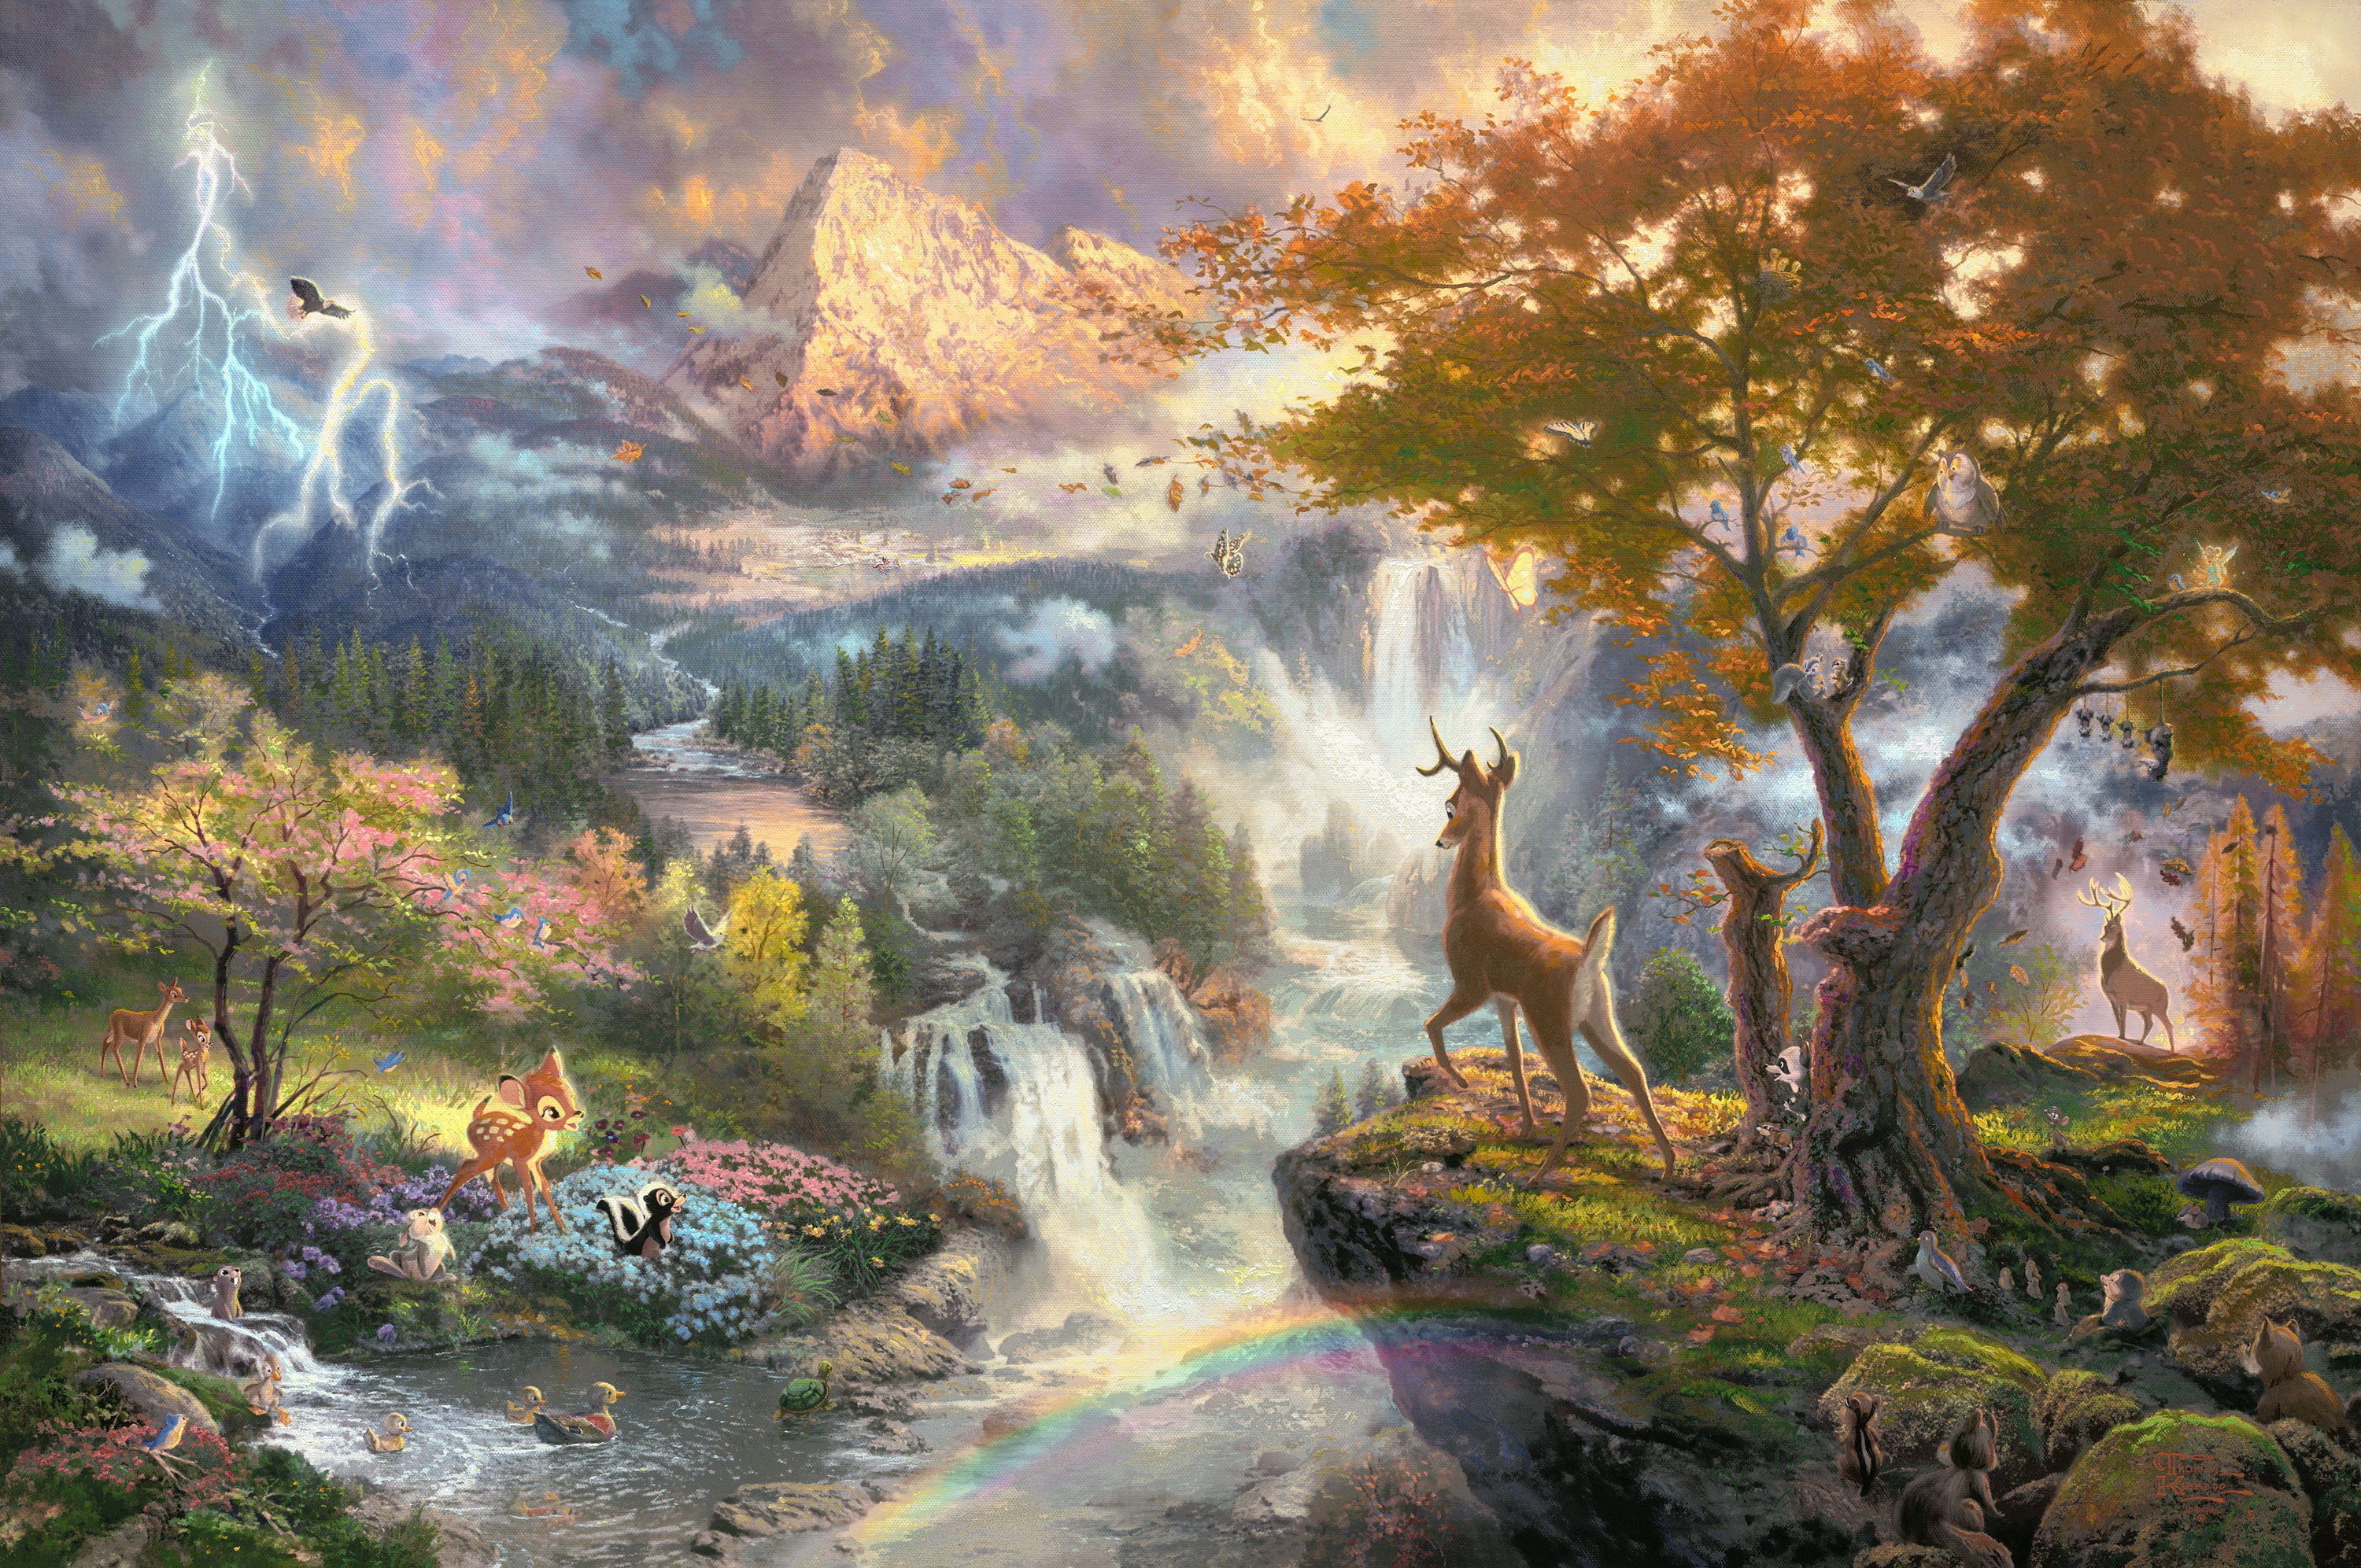 Wallpapers by THOMAS KINKADE - Wallpaper Abyss